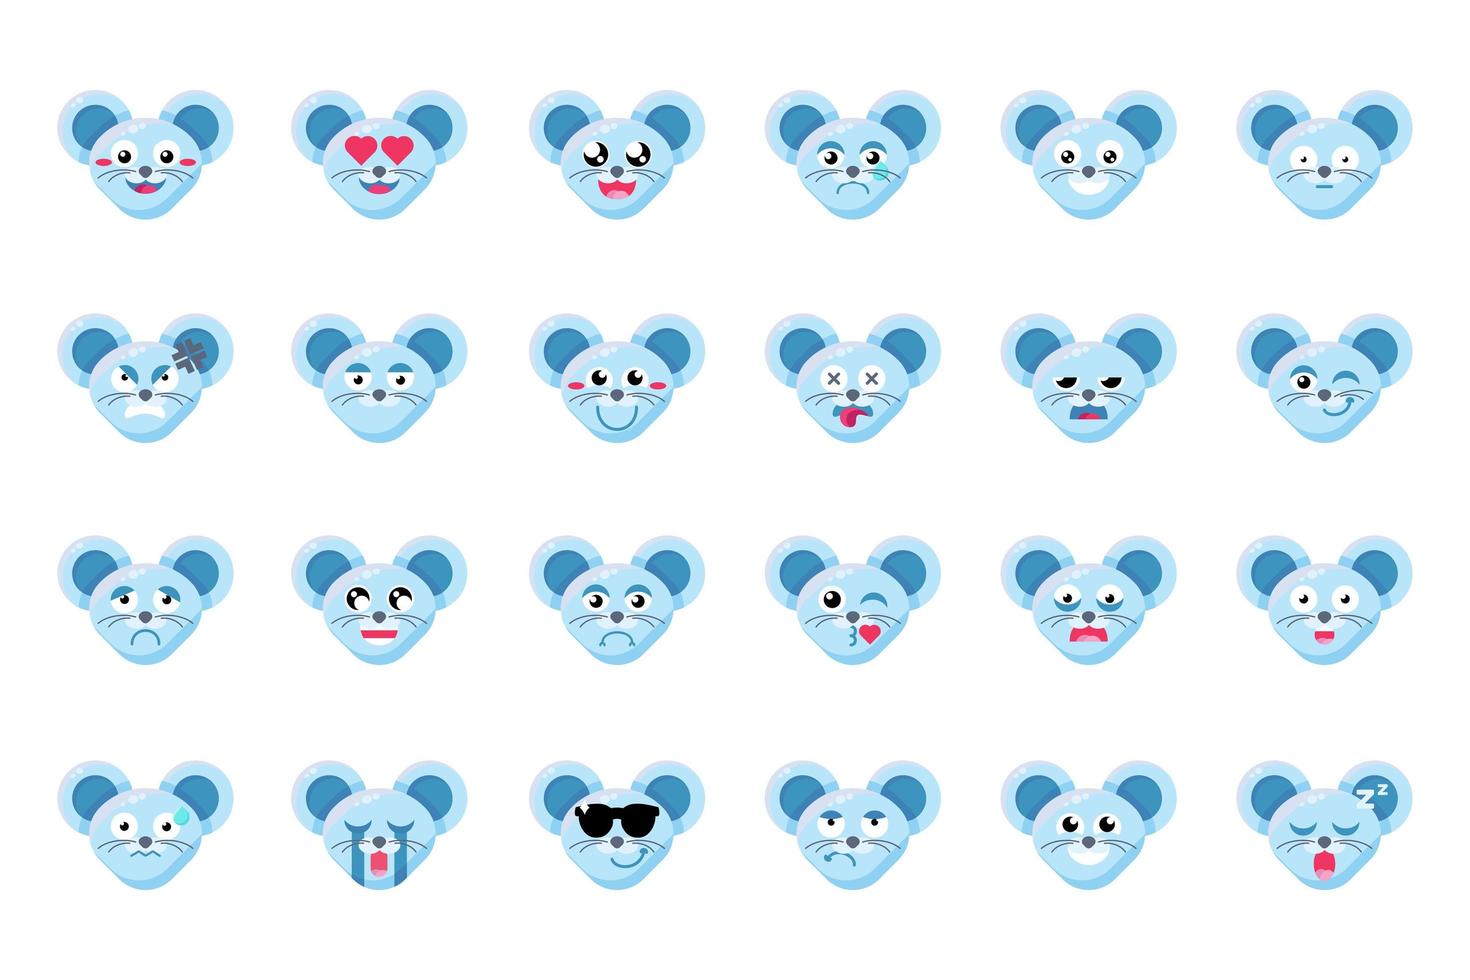 Mouse face flat vector emoticons set